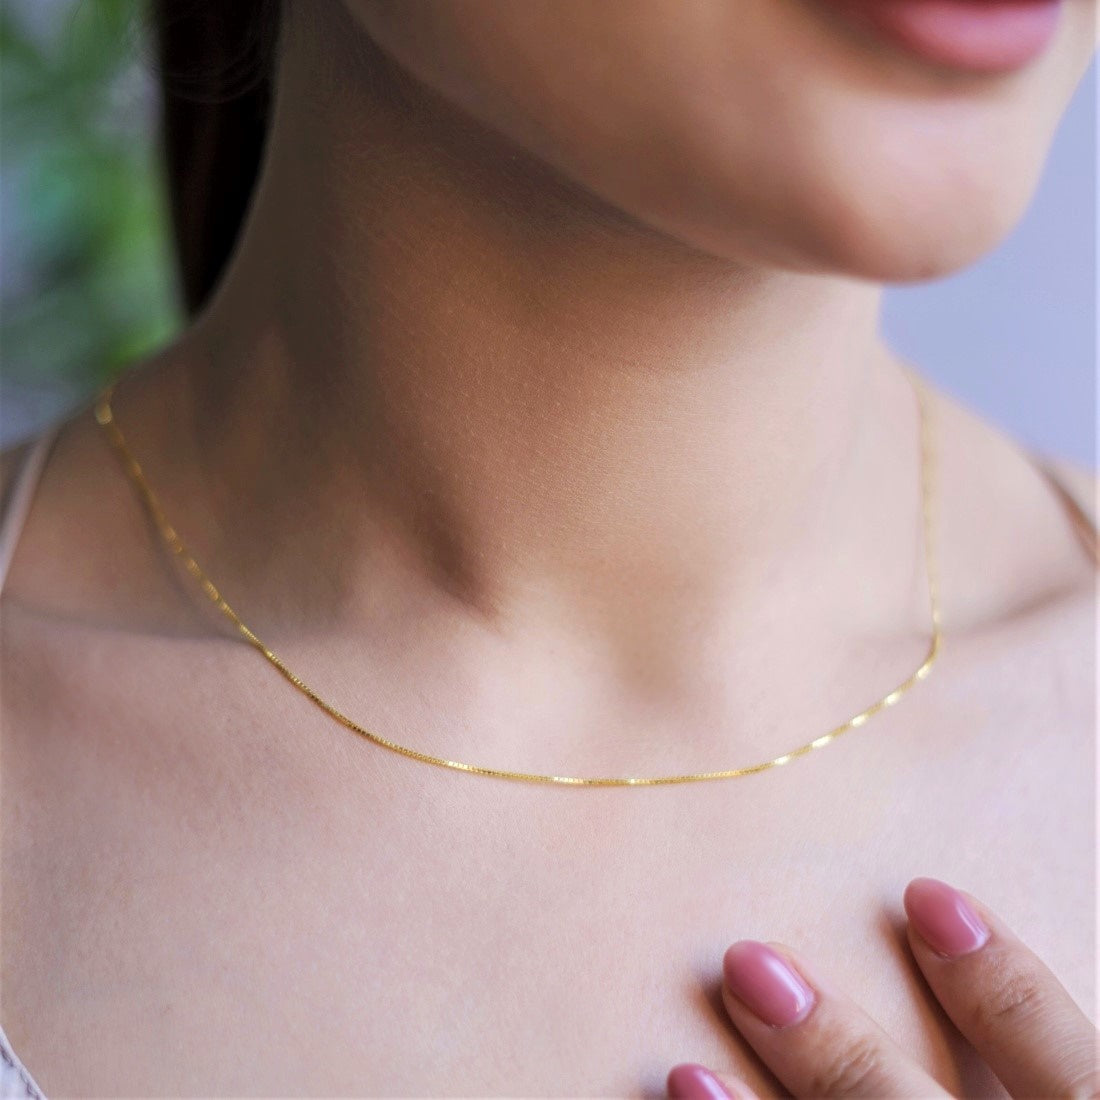 Sleek and Modern Golden Plated 925 Silver Box Chain